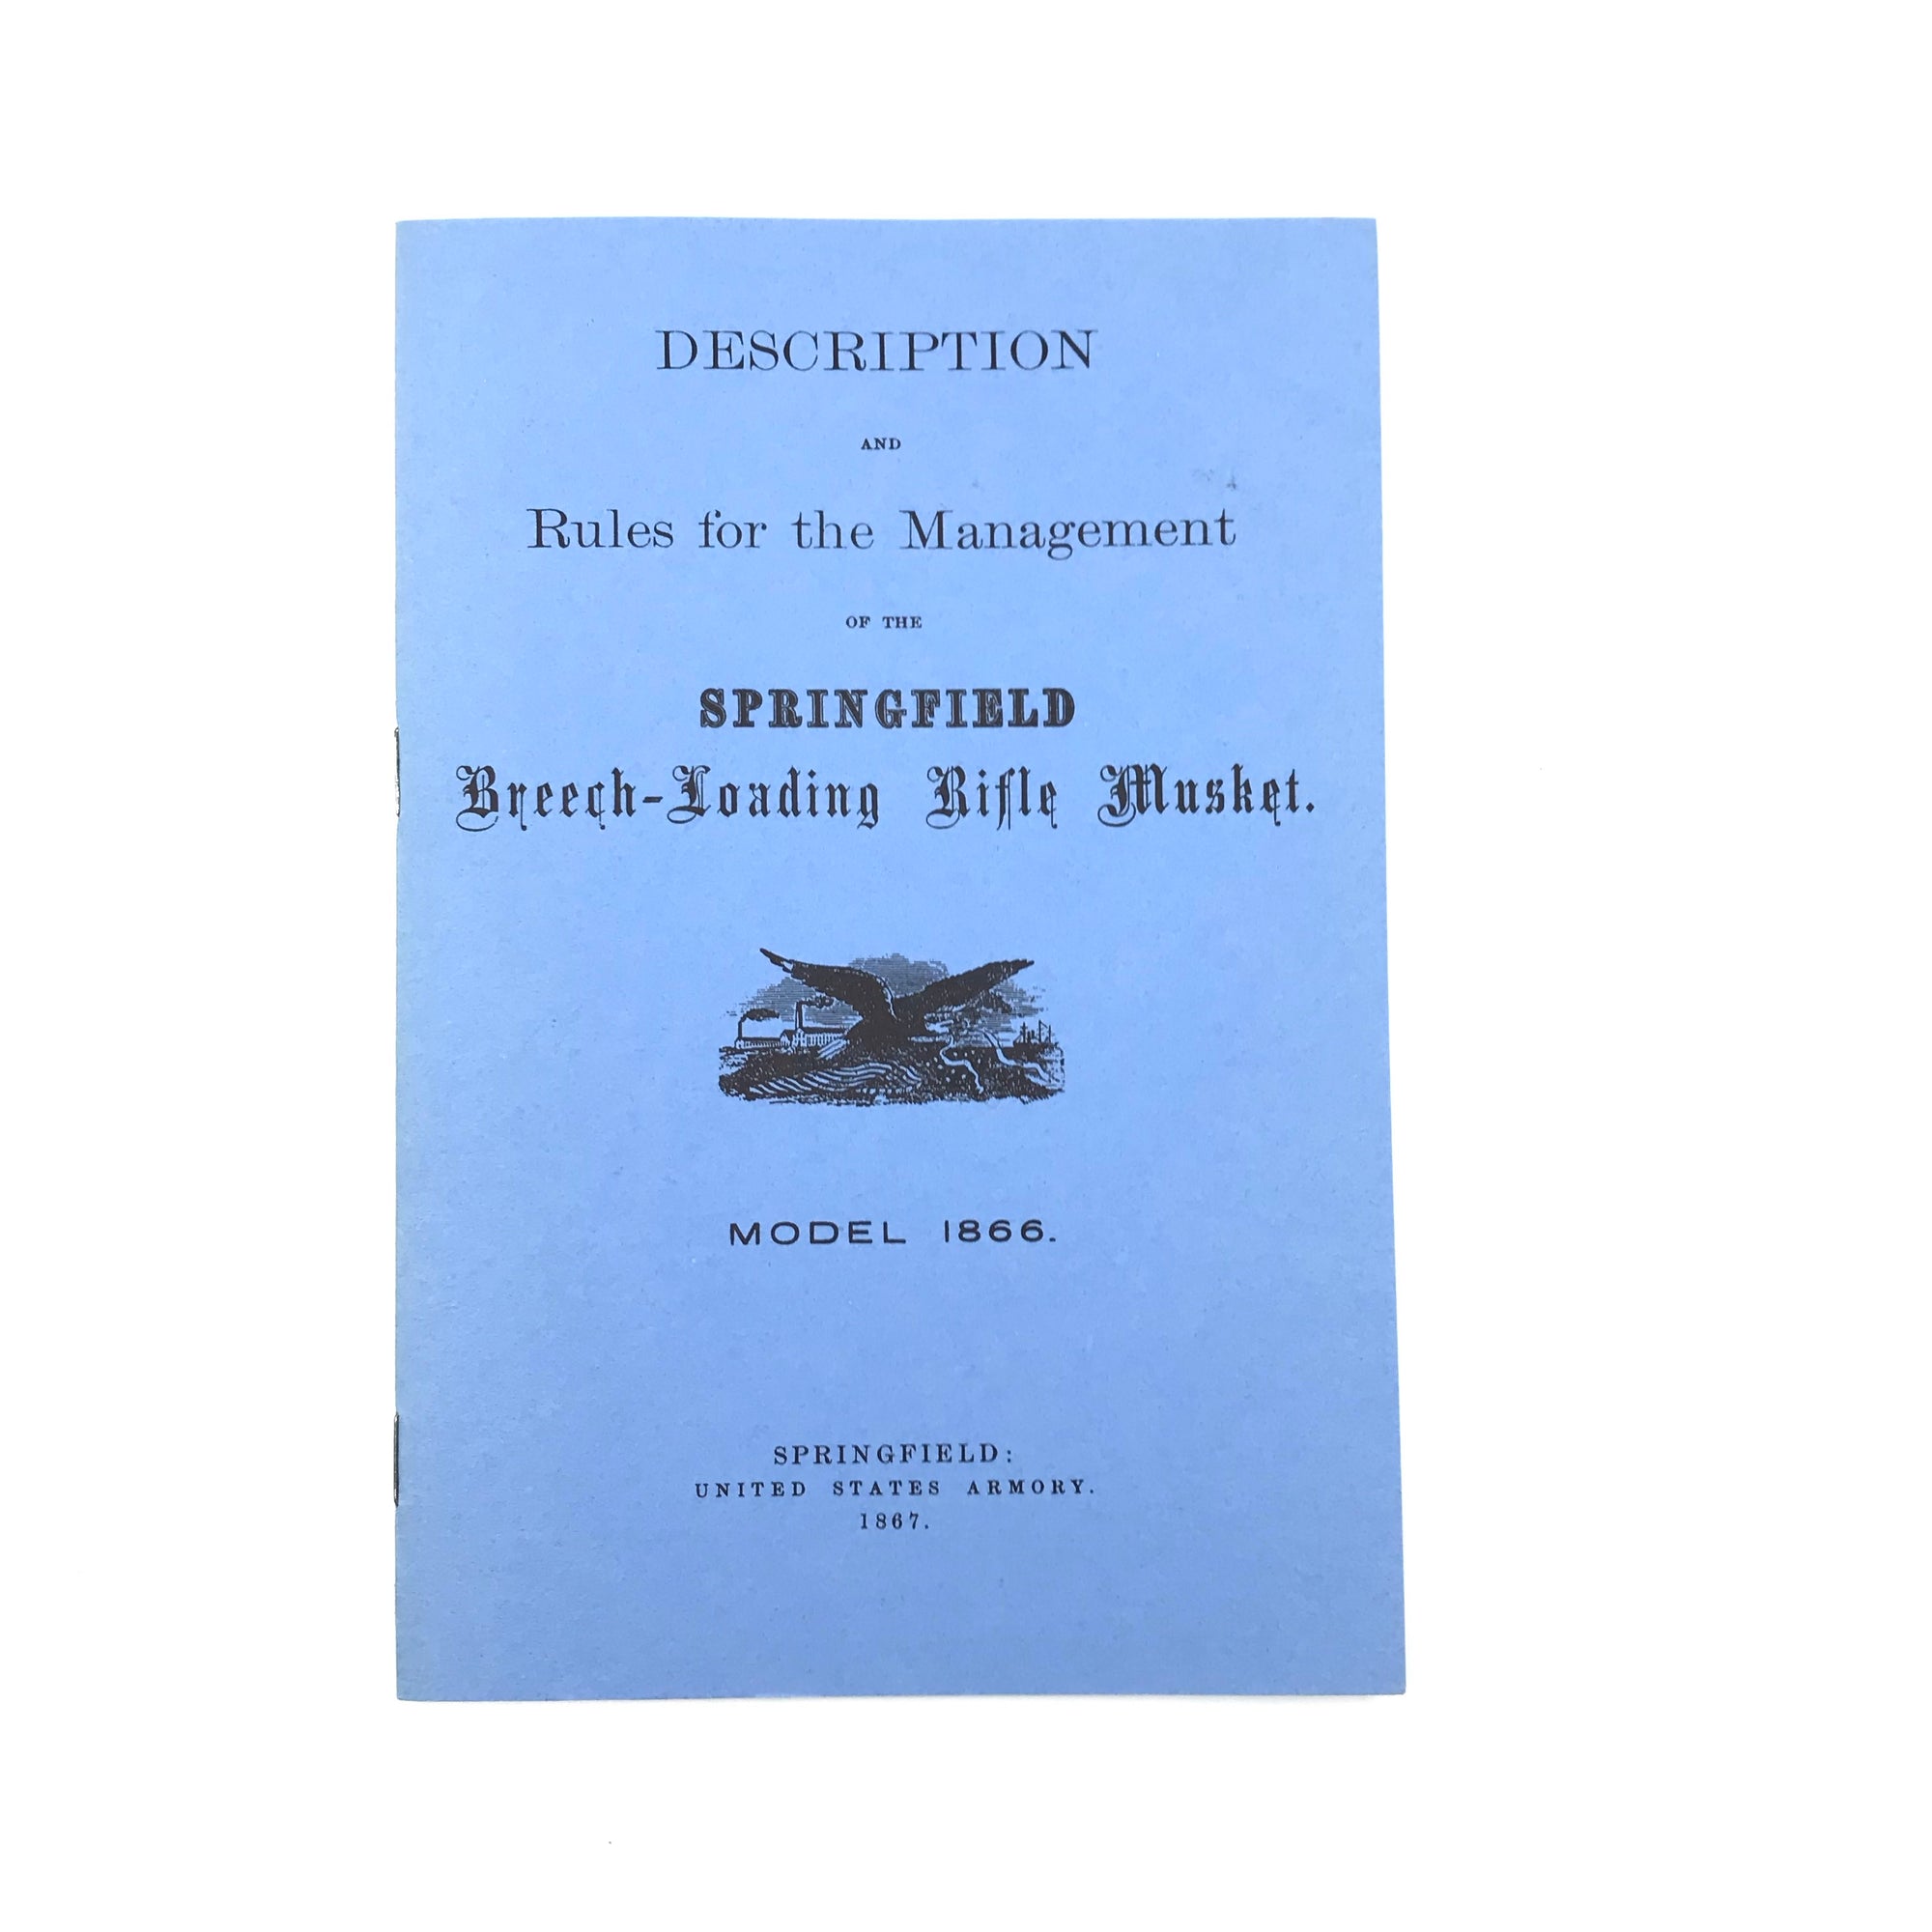 Descrption and Rules of Management of the Springfield Breech Loading Rifle Musket Model 1866 P.B. Reprint